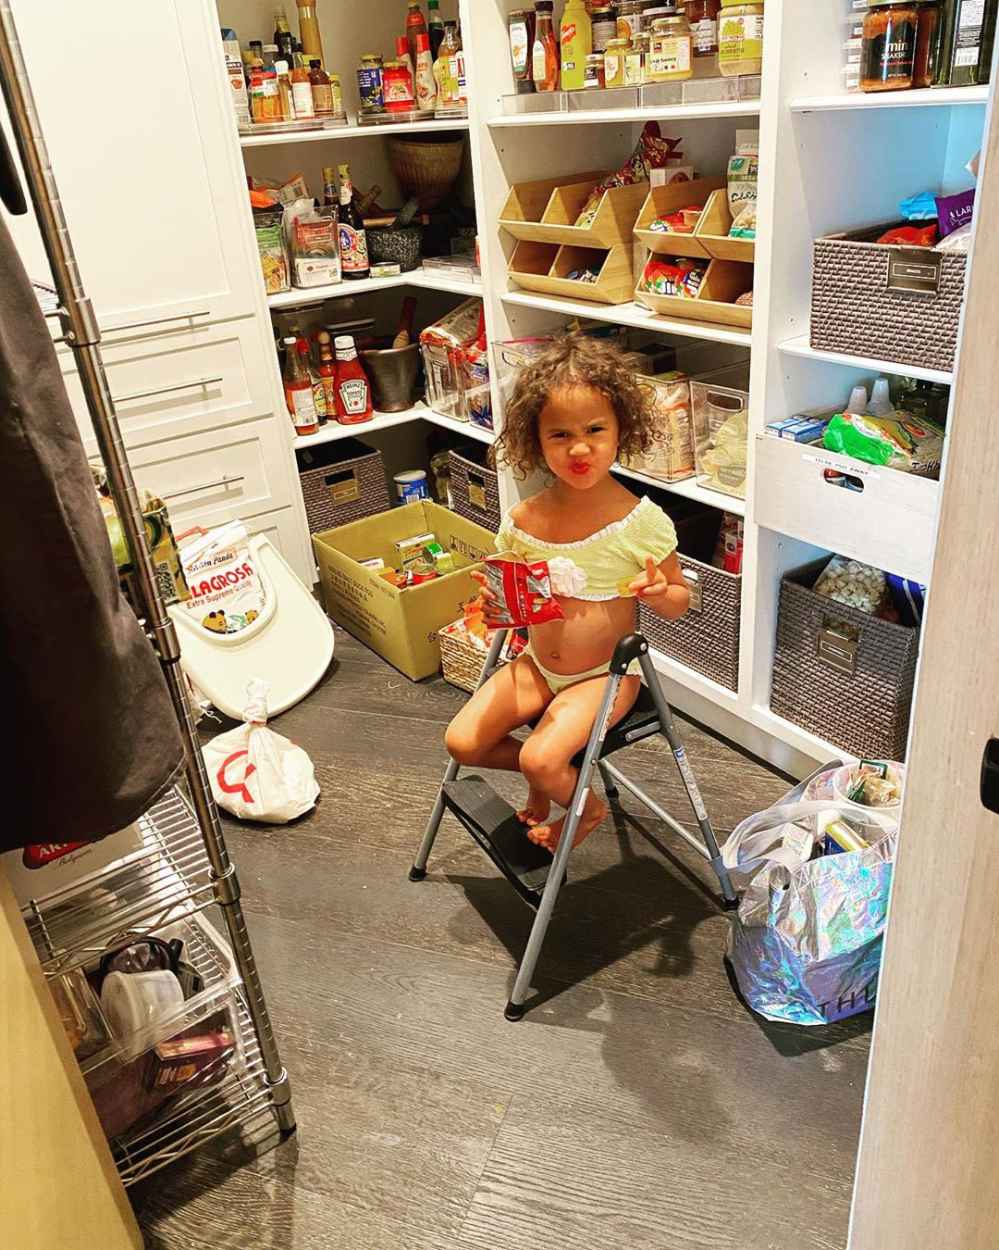 Chrissy Teigen Catches Daughter Luna Snacking in the Pantry